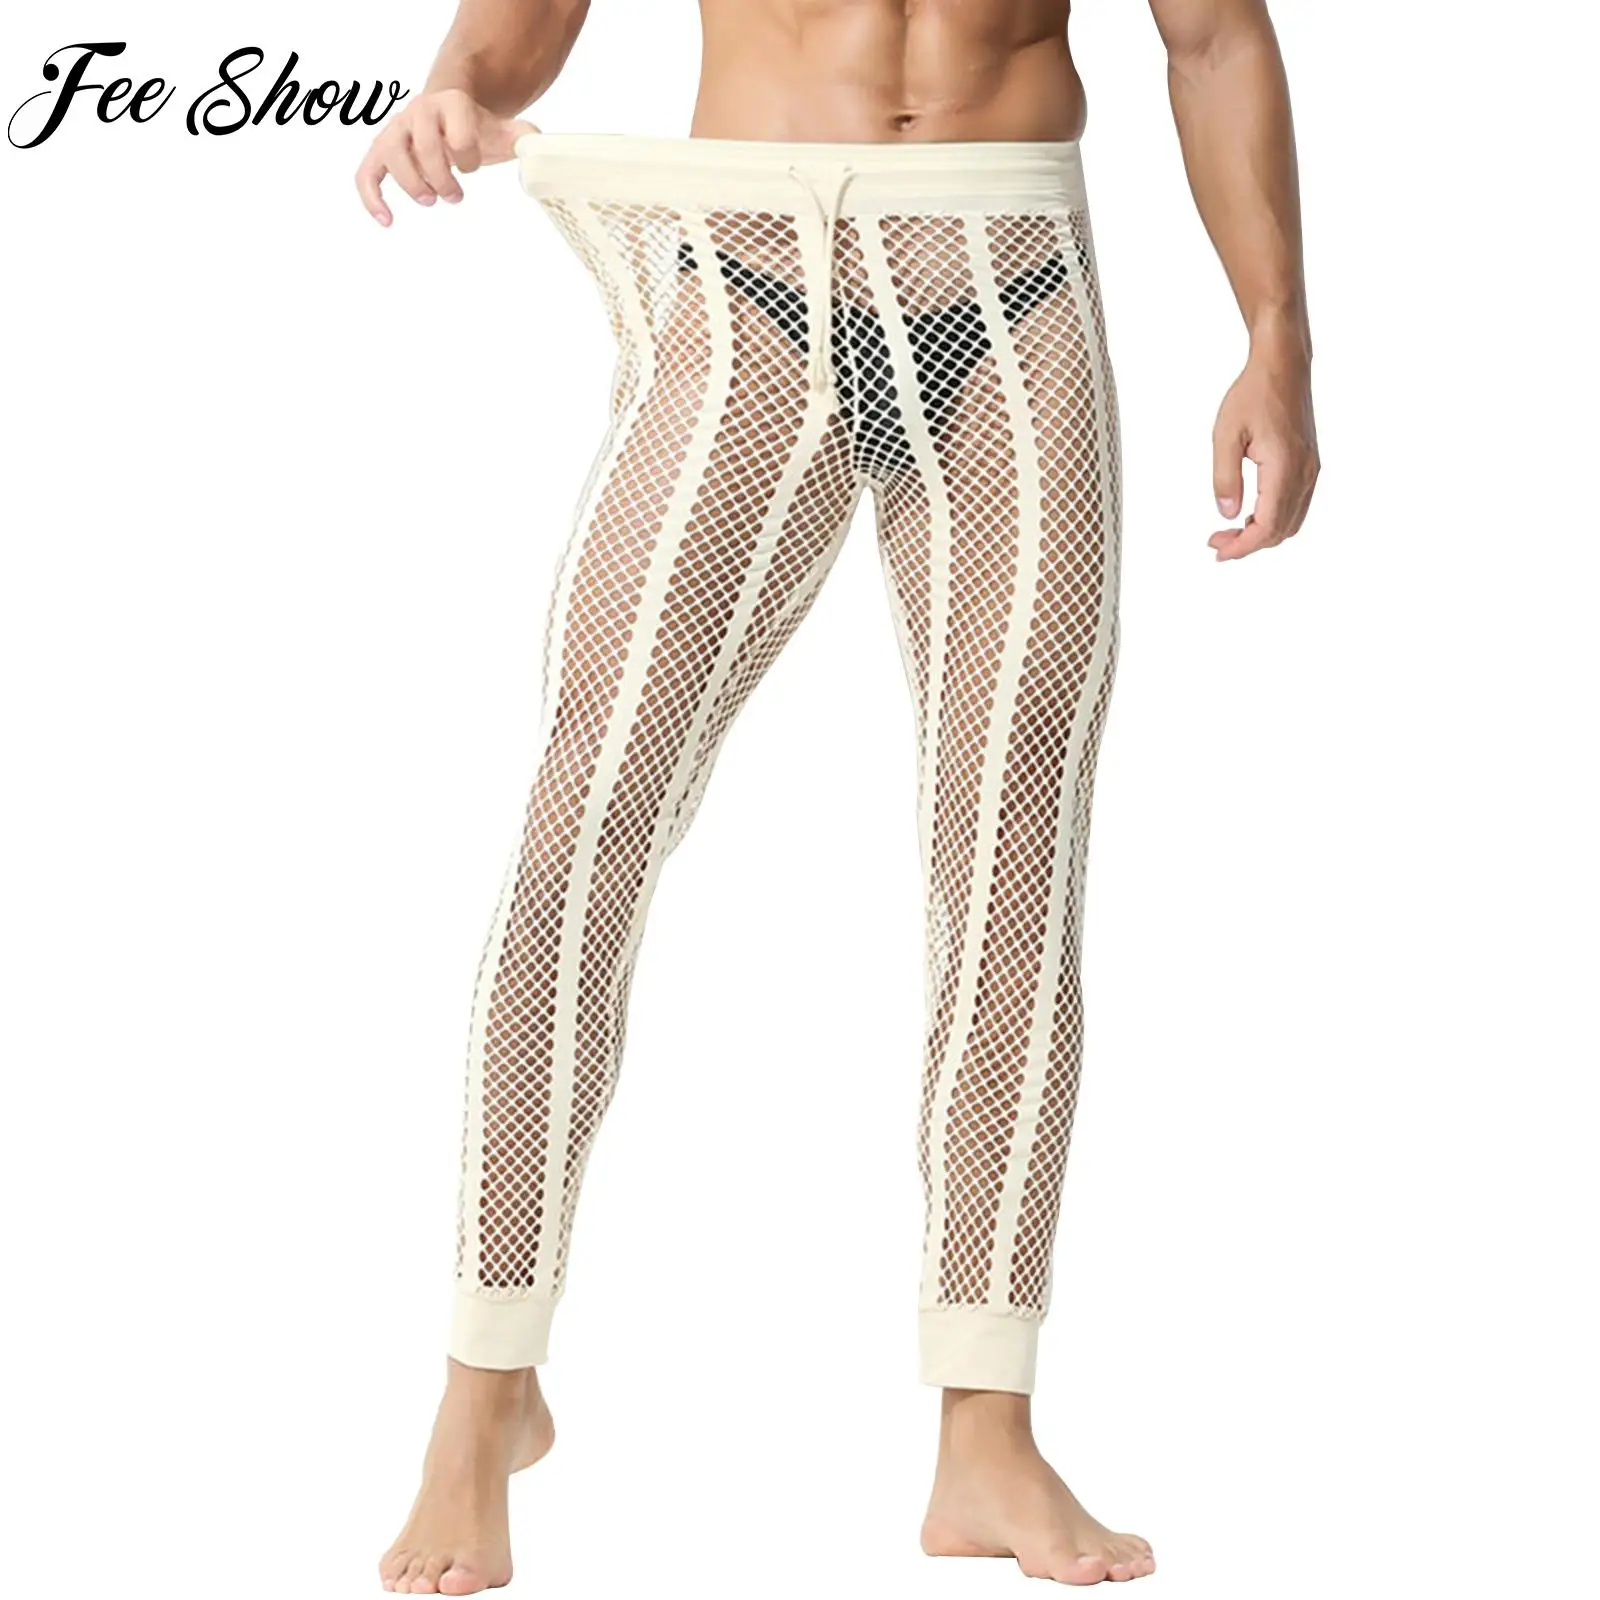 

Mens Hollow Out See-through Mesh Pants Fitness Workout Striped Leggings Bodybuilding Drawstring Elastic Waistband Trousers